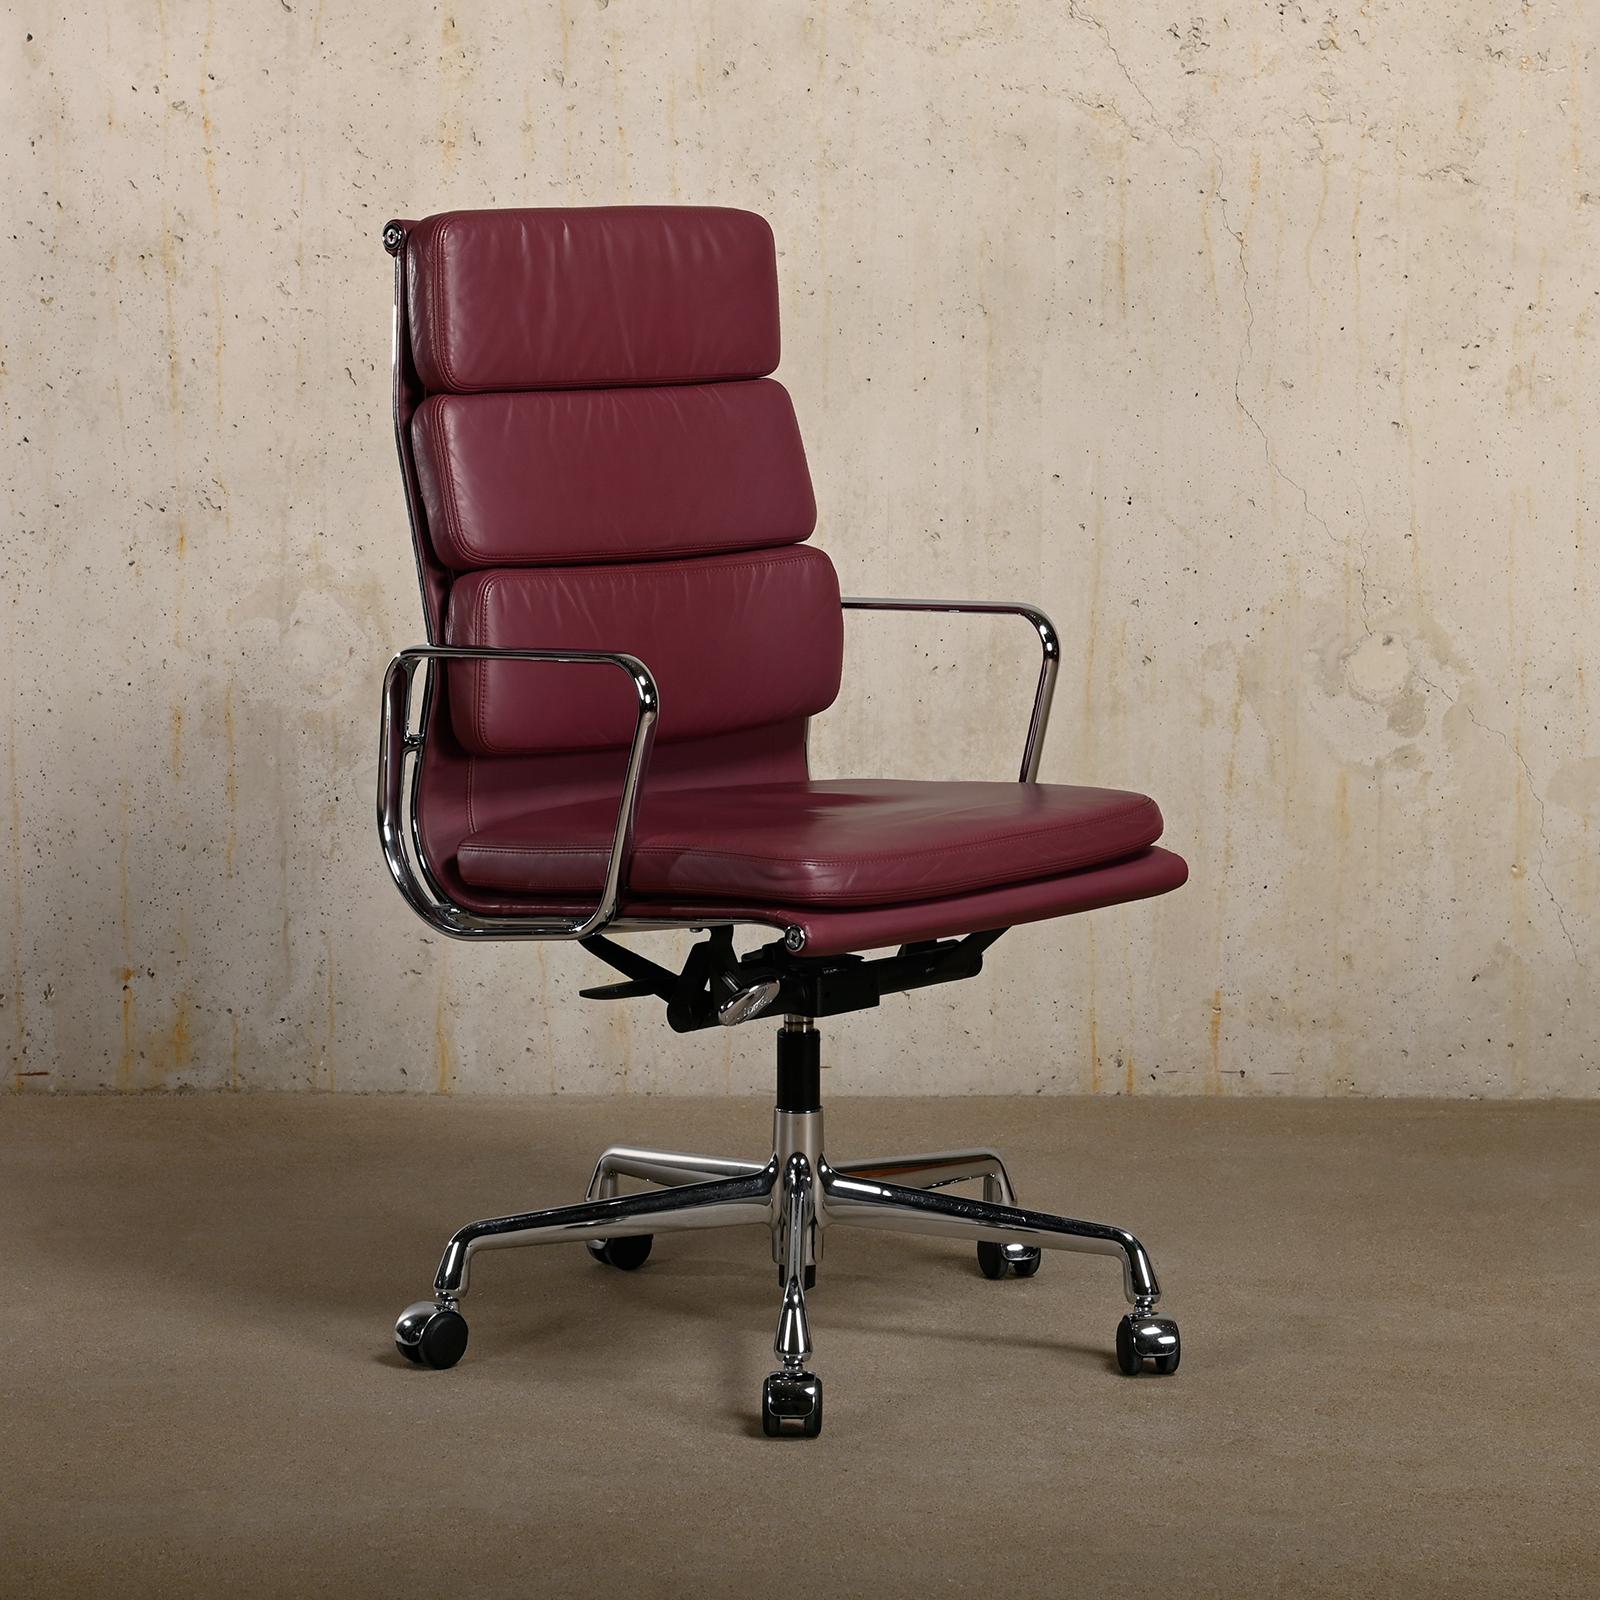 Charles & Ray Eames EA219 Office Chair in Chrome and Aubergine leather, Vitra In Good Condition For Sale In Amsterdam, NL